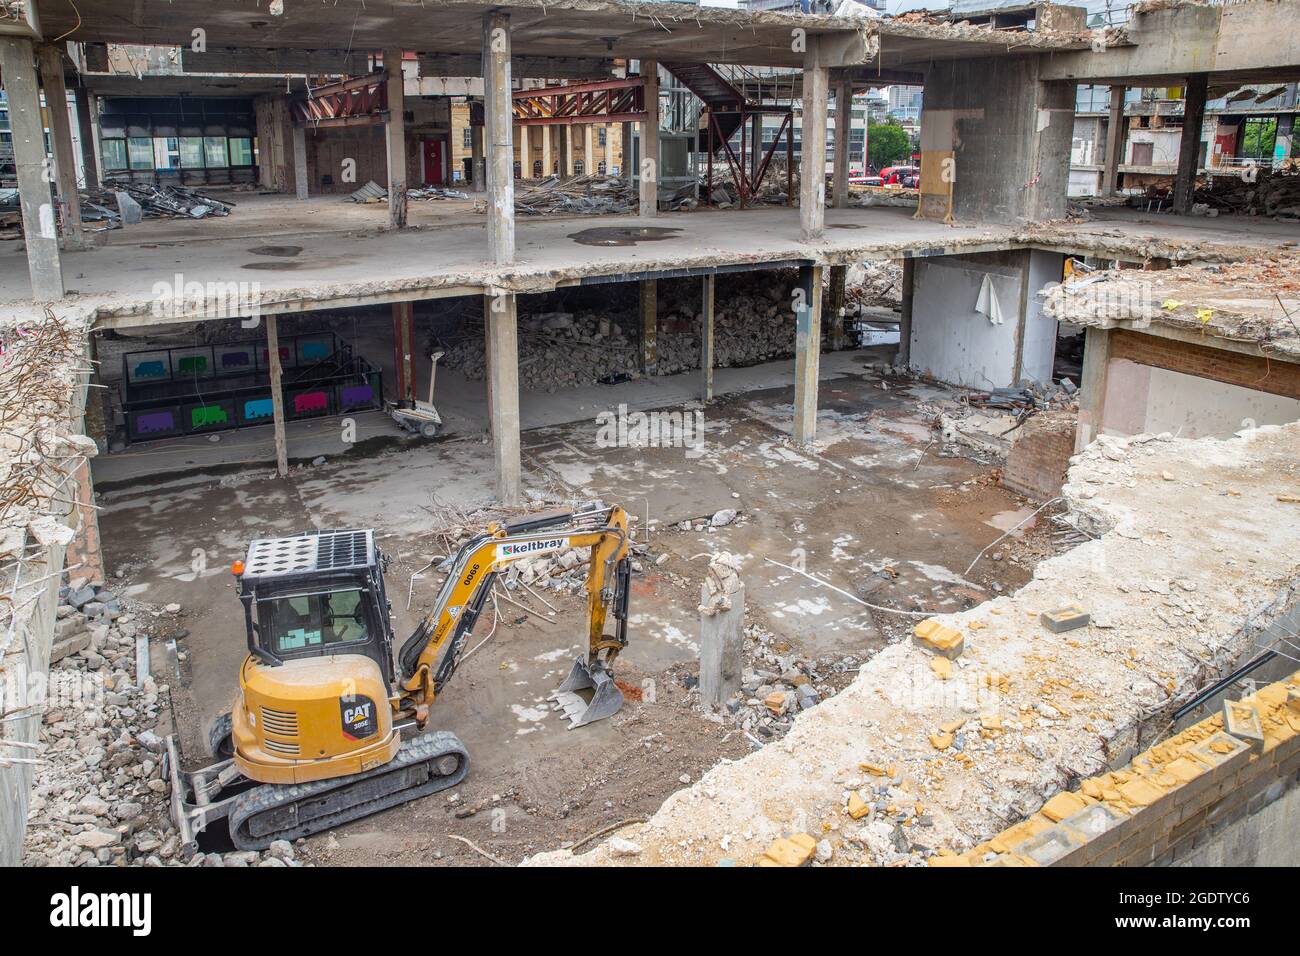 Demolition of the Elephant and Castle shopping centre Stock Photo